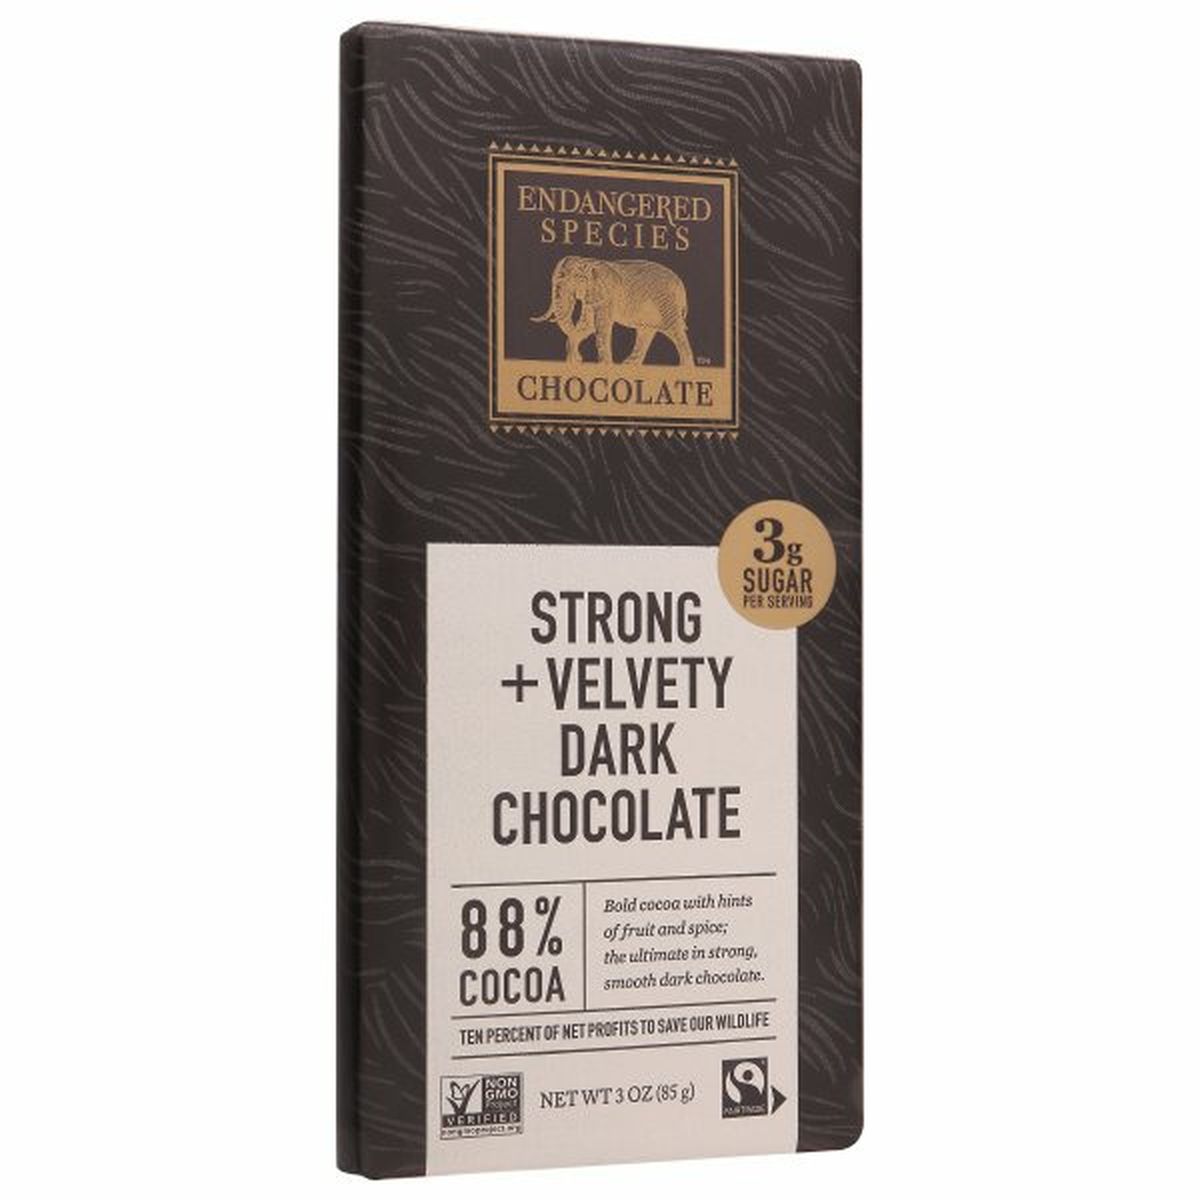 Calories in Endangered Species Chocolate, Strong + Velvety Dark Chocolate, 88% Cocoa